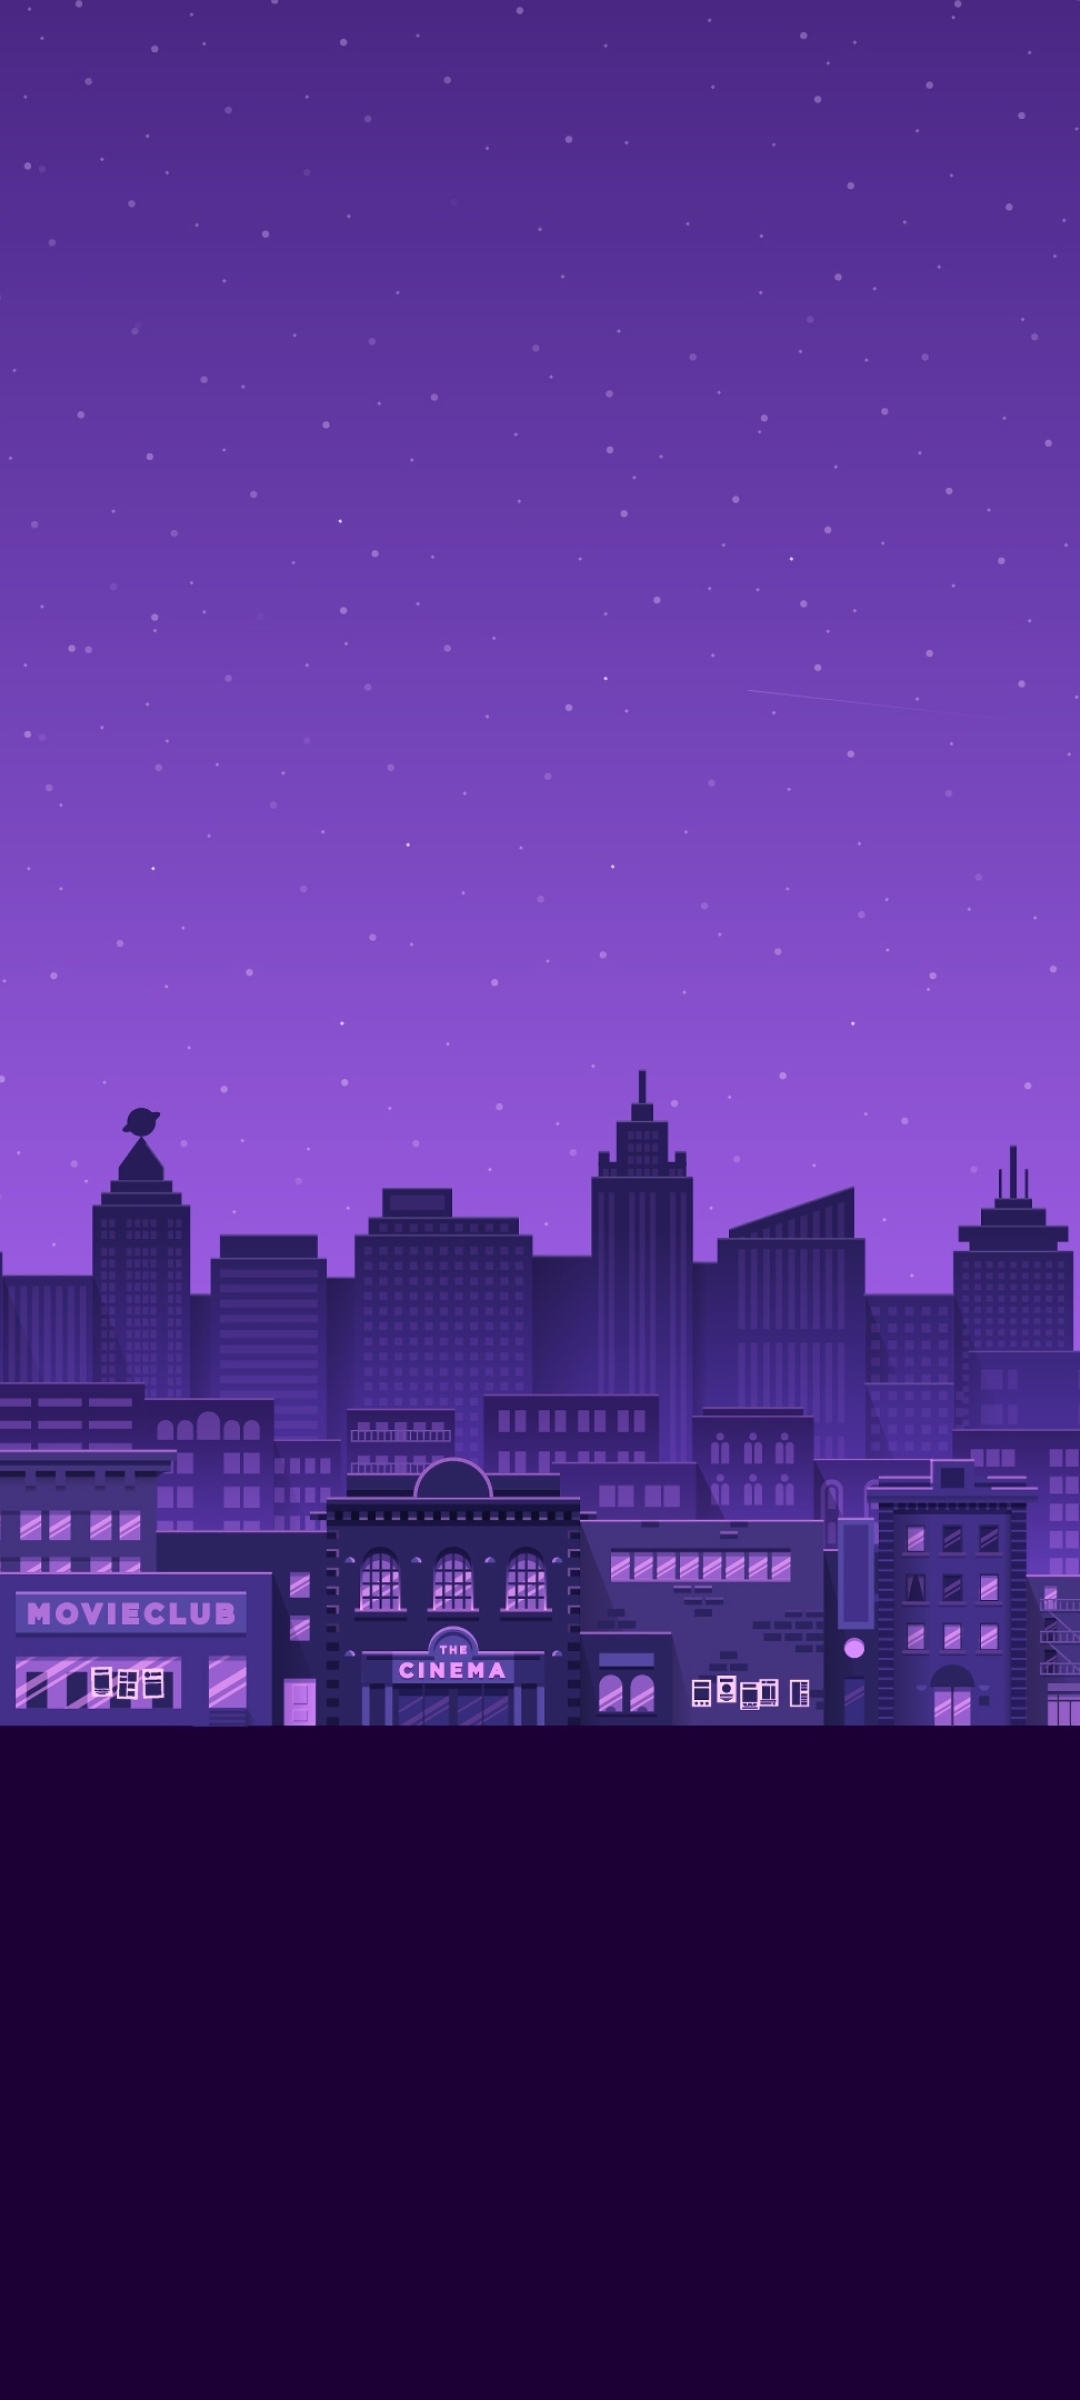 A purple city skyline with buildings and stars - Purple quotes